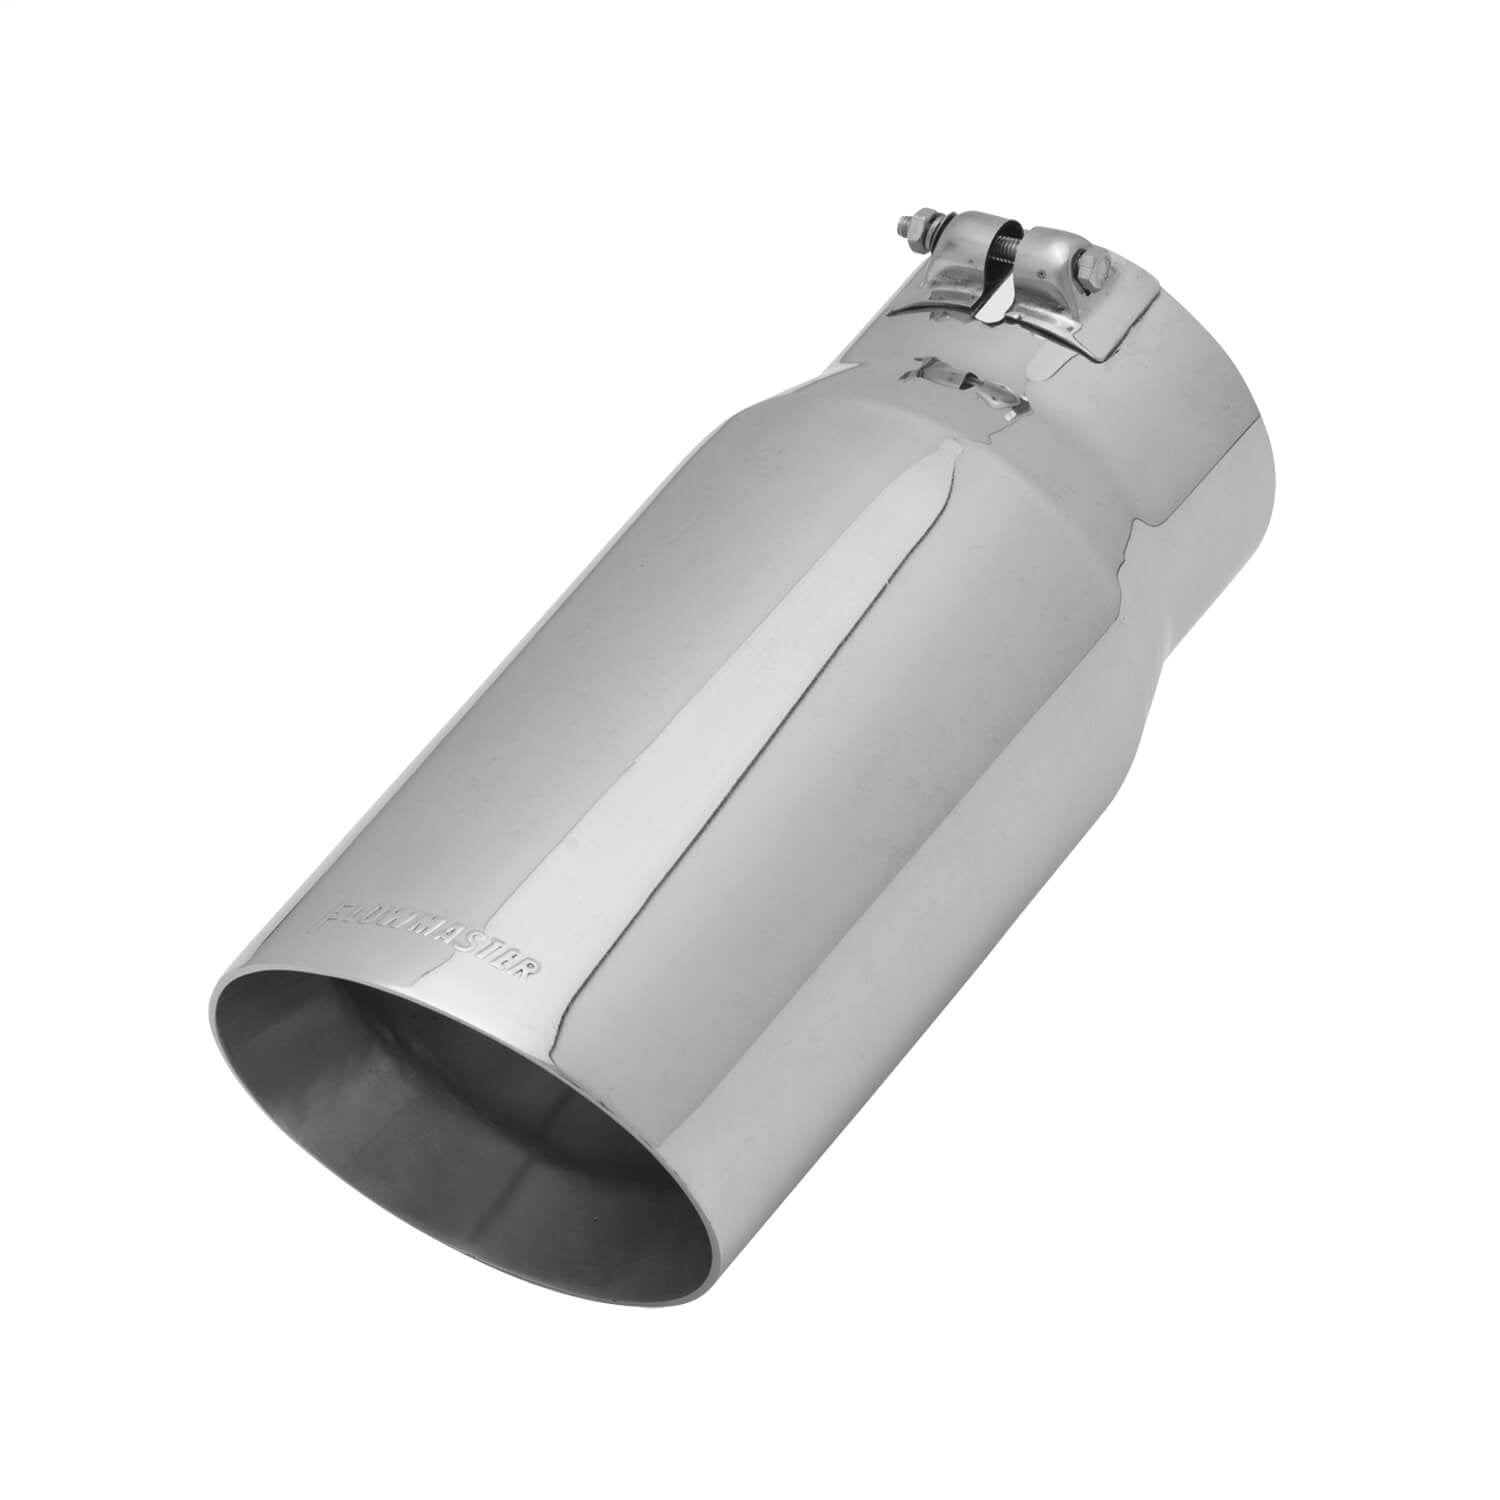 Flowmaster 15376 Exhaust Tip 500 In Angle Cut Polished Ss Fits 400